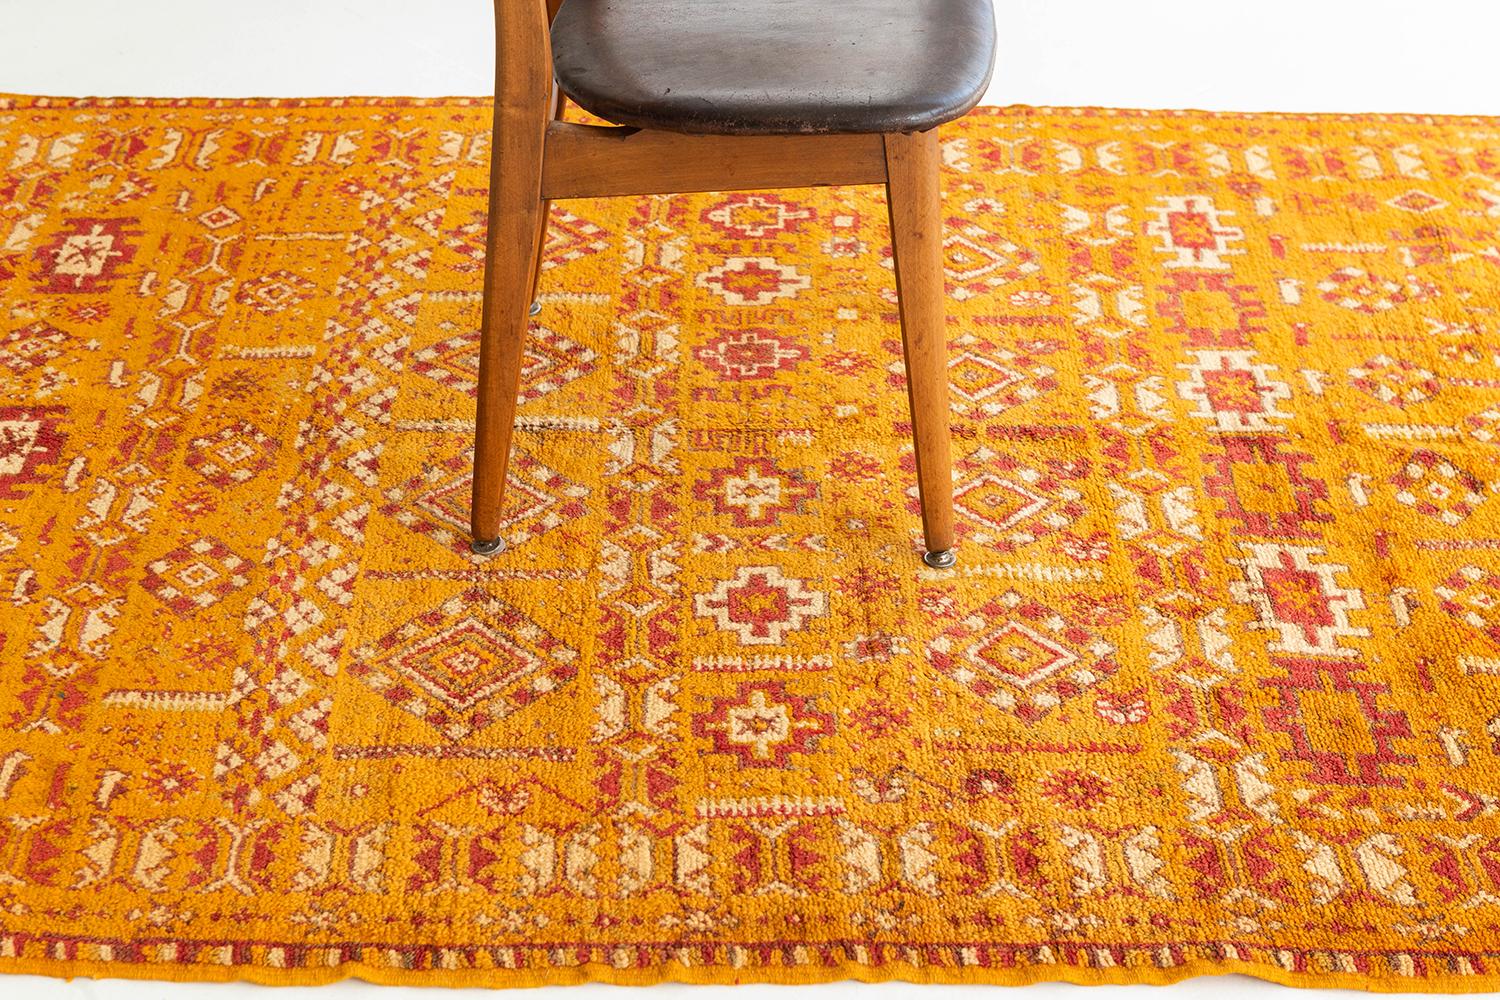 Saffron pile field with ivory and rich orange elements. All-over patterning with banded repeats and border motifs features archaic Berber symbols of prosperity and fortune in varied forms. A unique vintage tribal rug from the High Atlas Mountains of